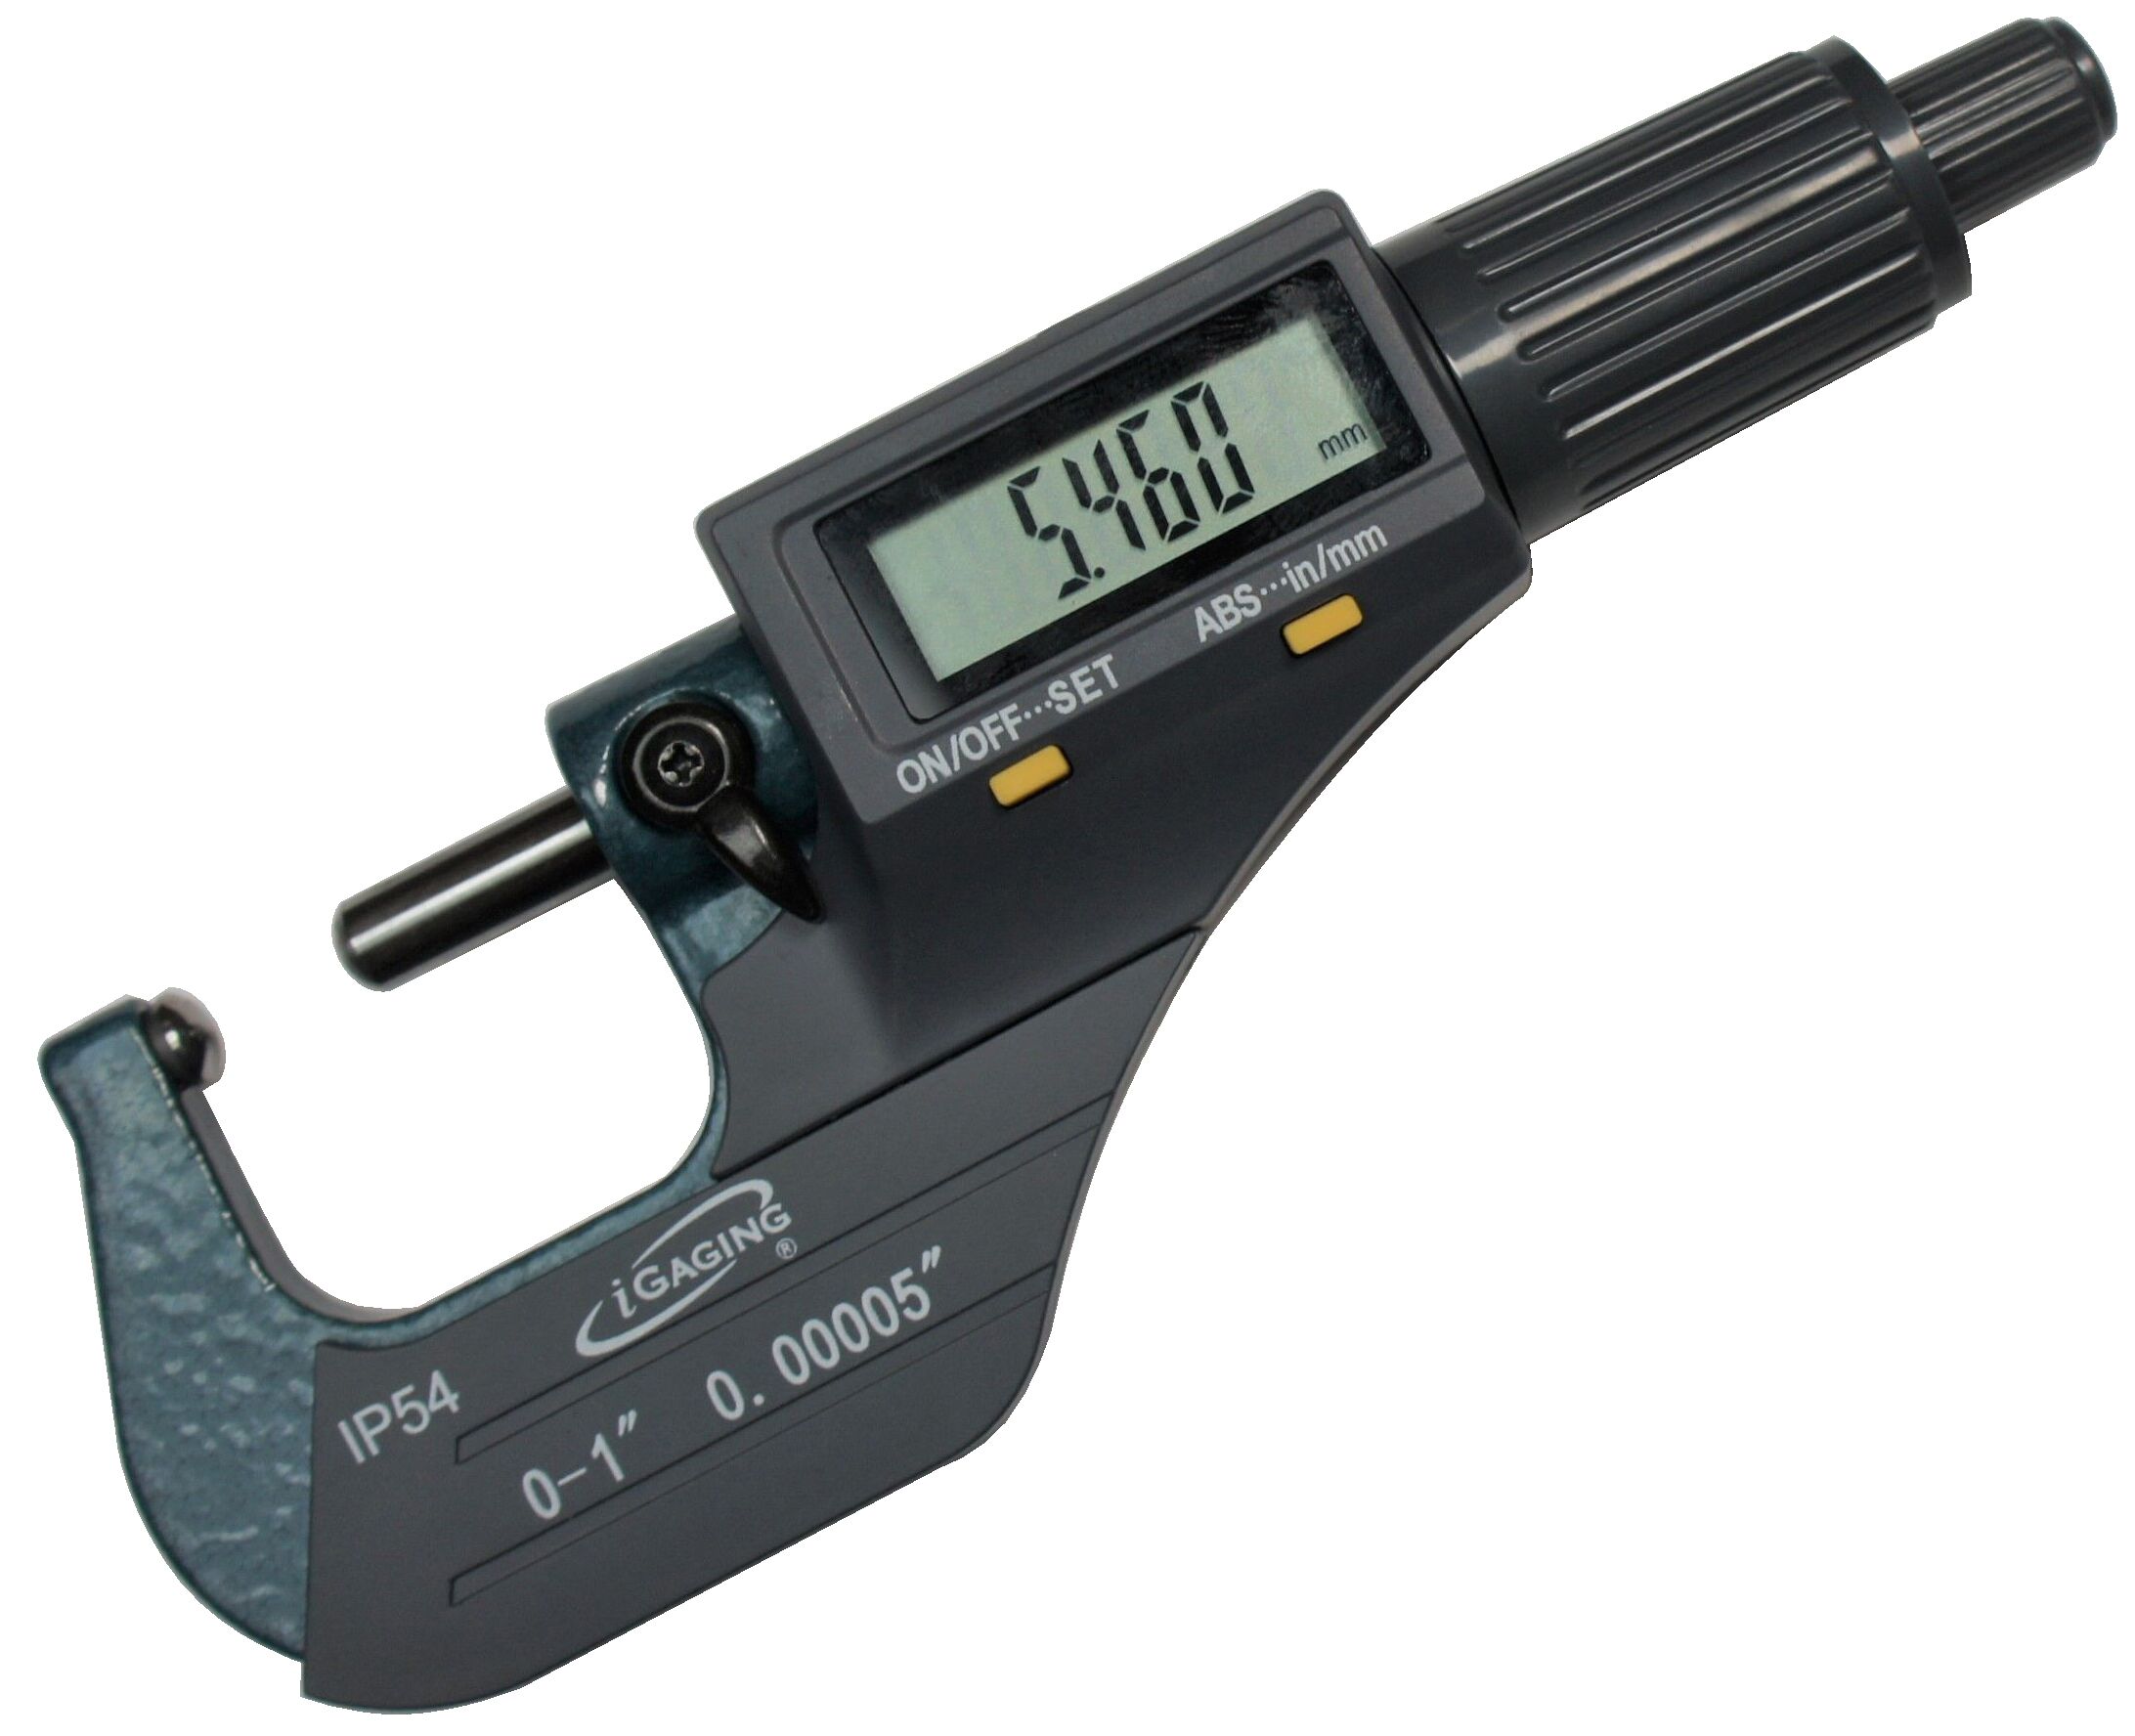 iGaging 3-4 Digital Electronic Outside Micrometer w/Large LCD Display Inch/Metric 